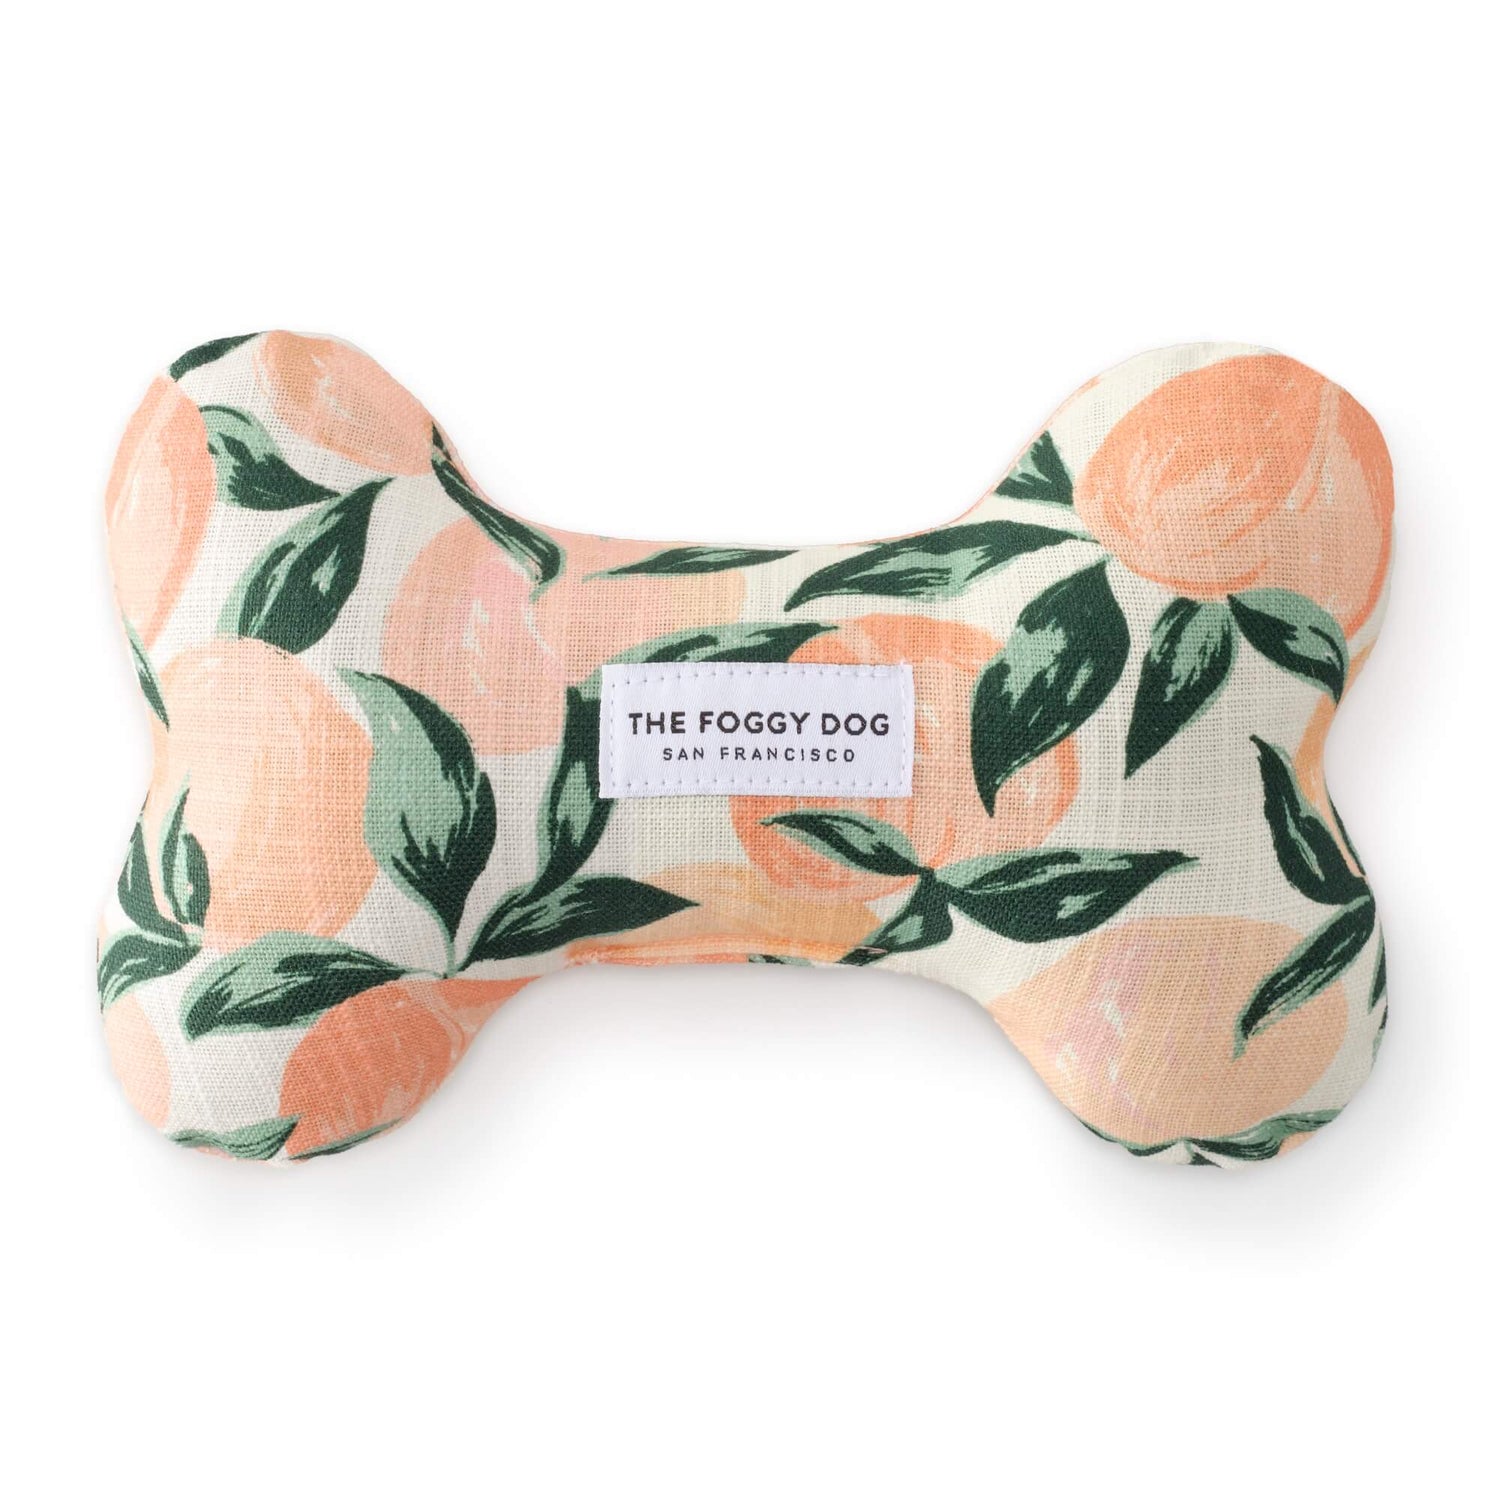 Peaches and Cream Dog Bone Squeaky Toy By The Foggy Dog